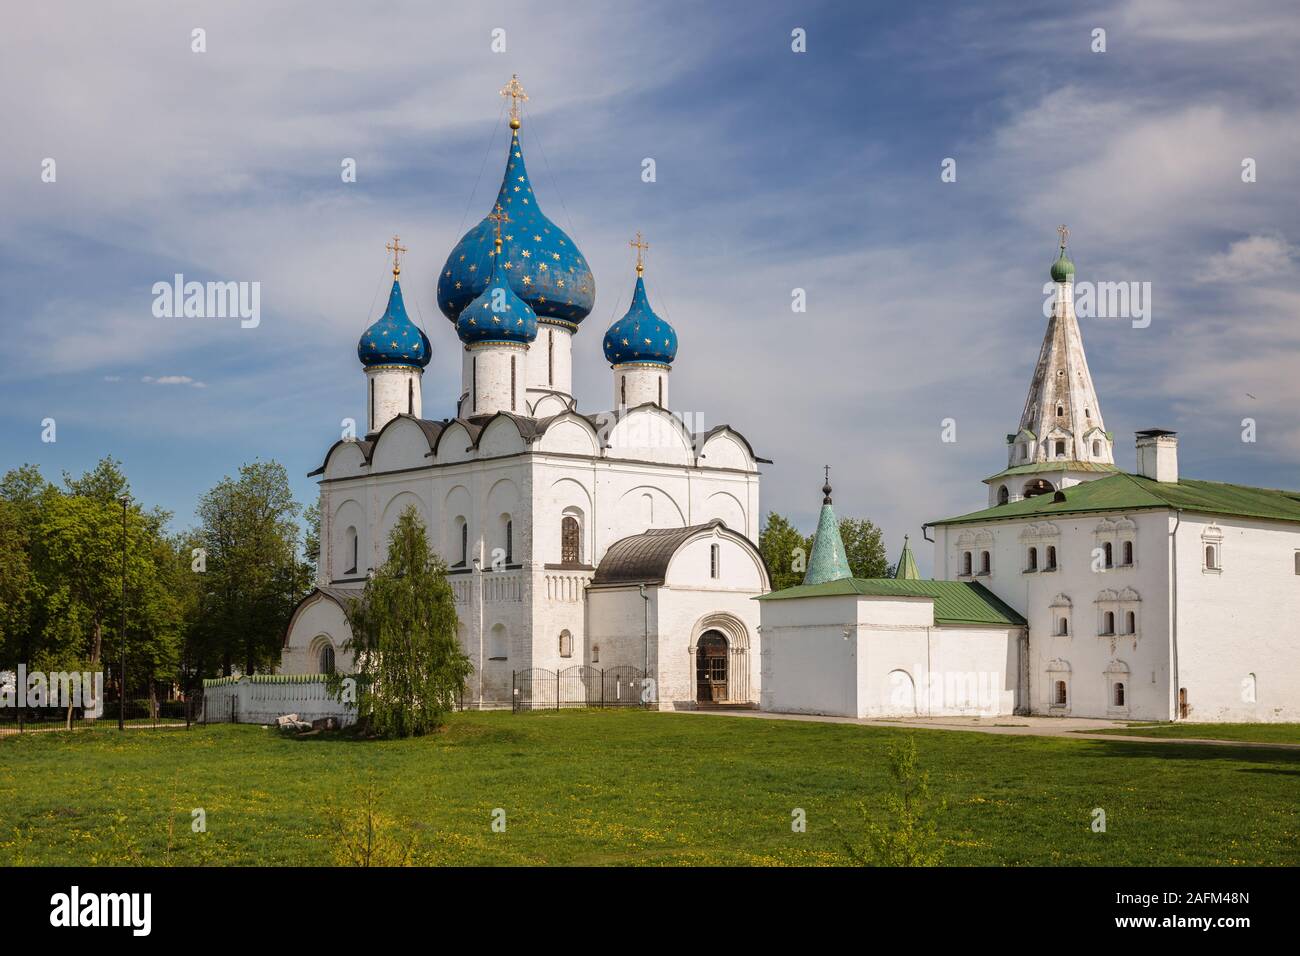 Suzdal, Golden Ring of Russia. Cathedral of Nativity of the Blessed Virgin Mary was built in 1222-1225. in d. Traditional Russian temple architecture Stock Photo